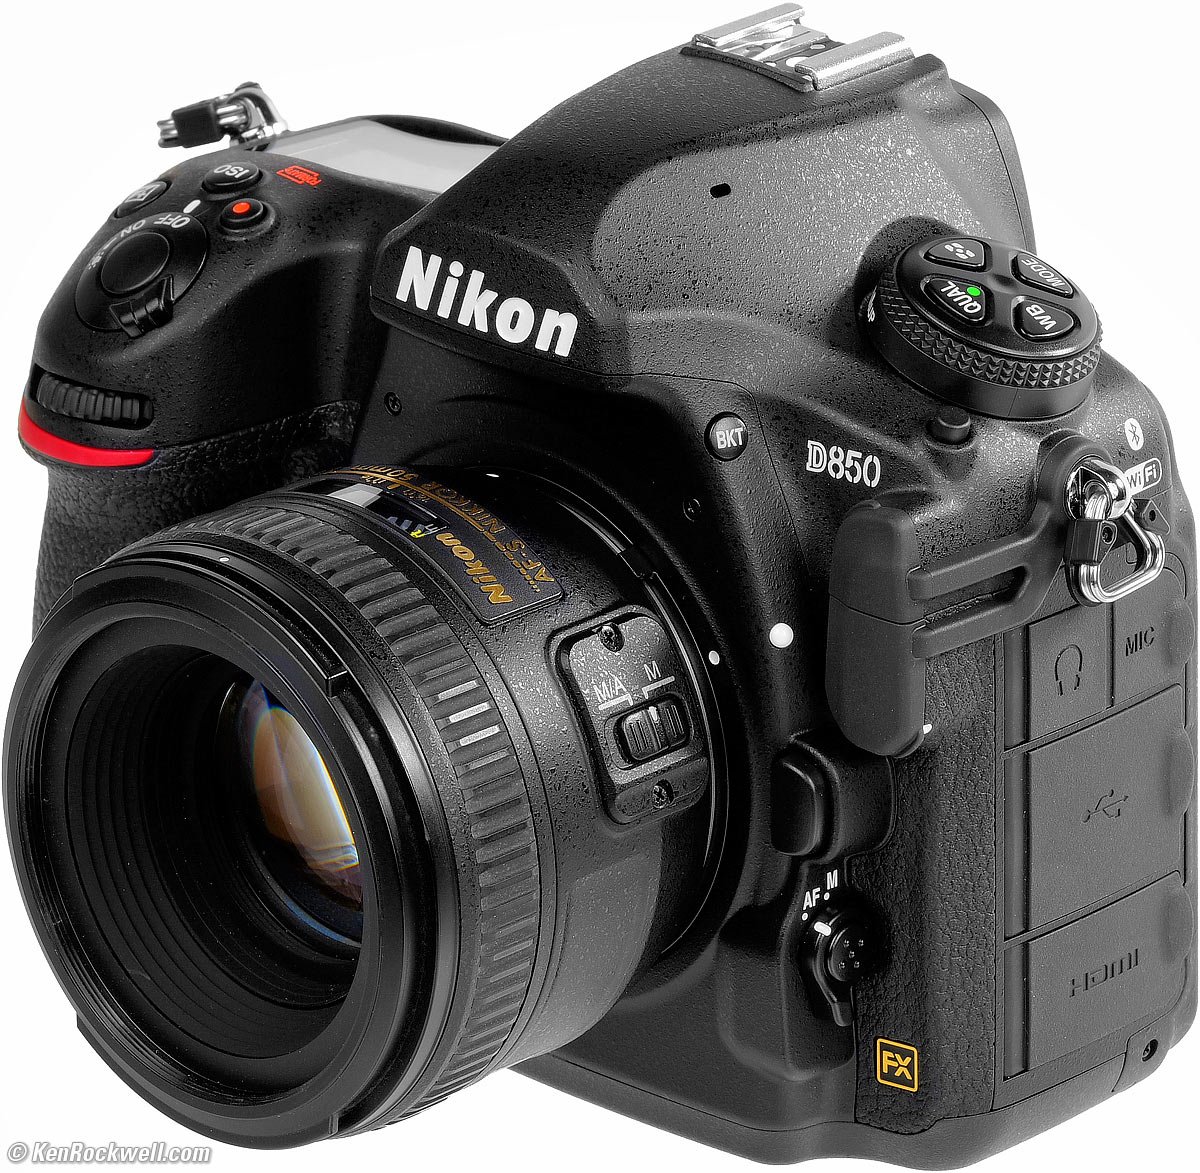 Nikon D850 Review & Sample Images by Ken Rockwell